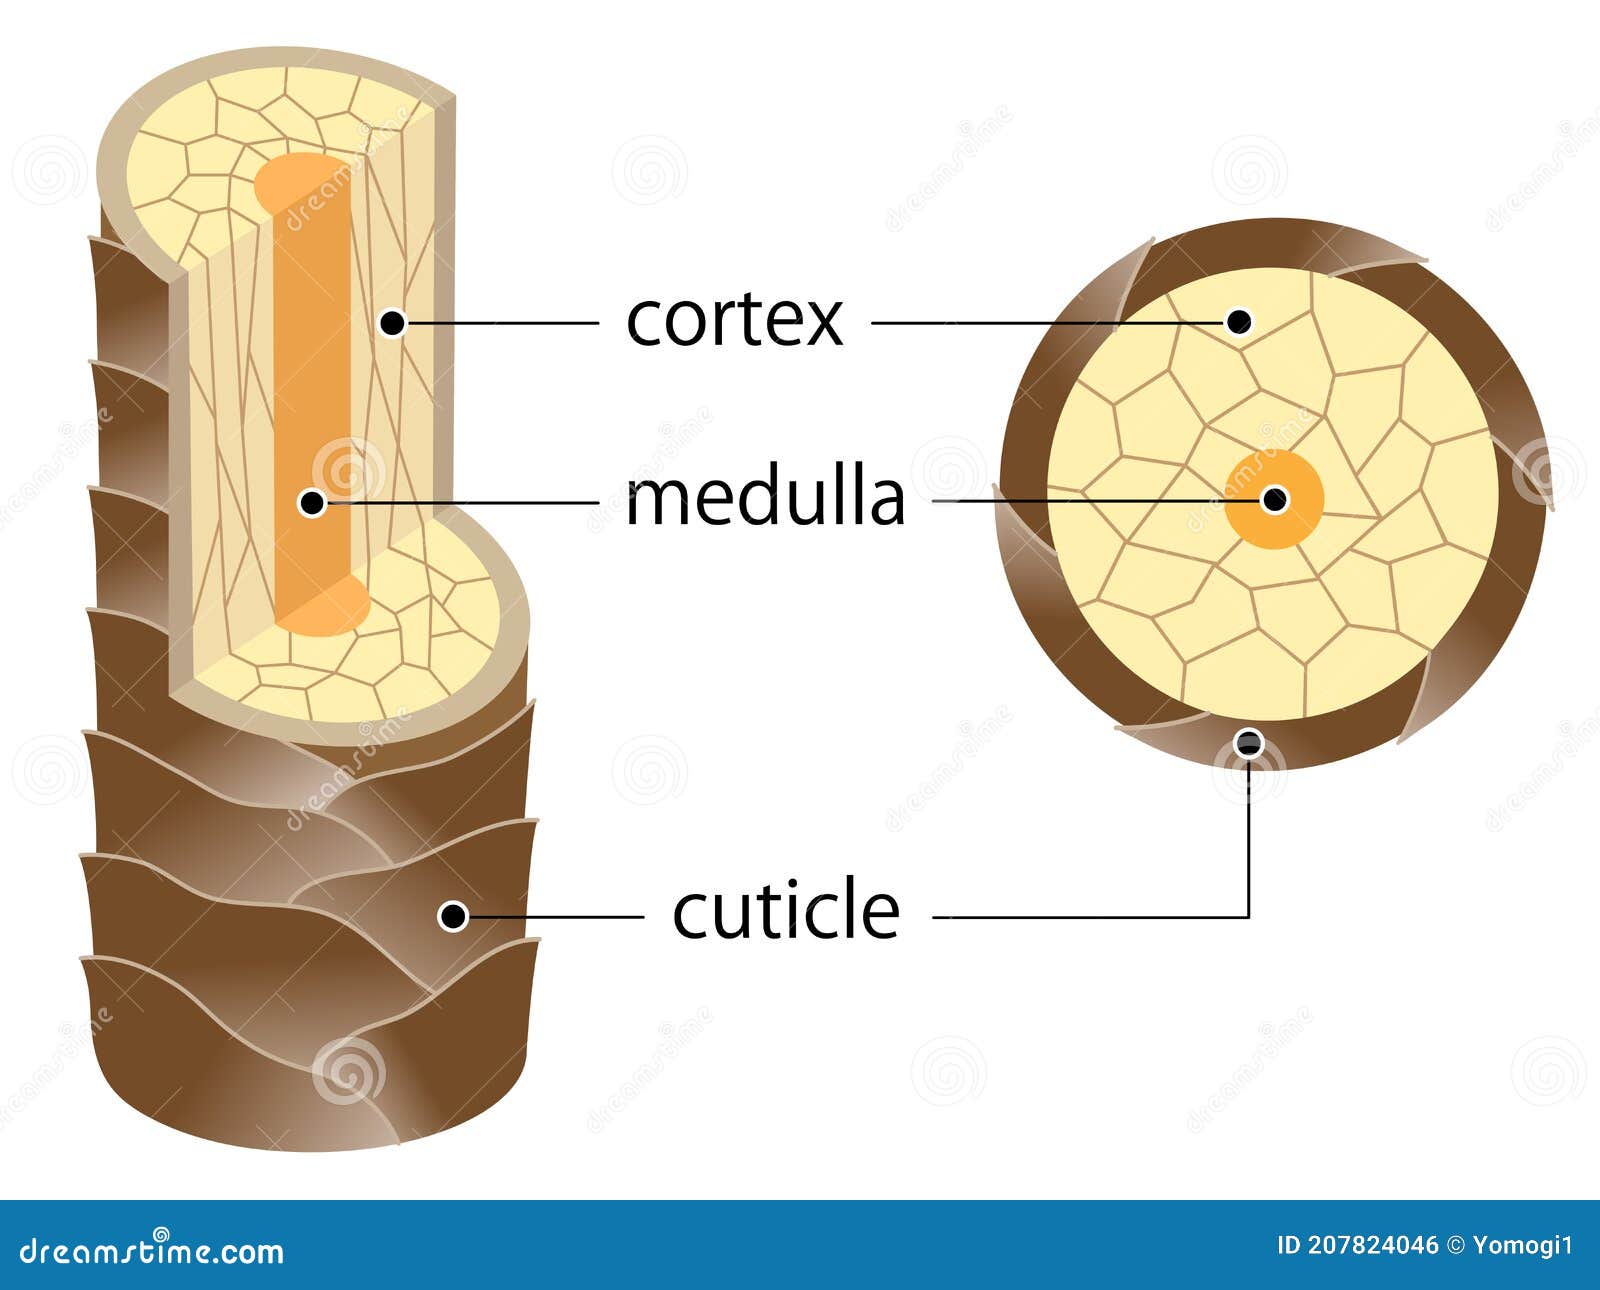 layer of hair structure. the hair shaft consists of cortex,cuticle, and medulla. hair care and beauty concept